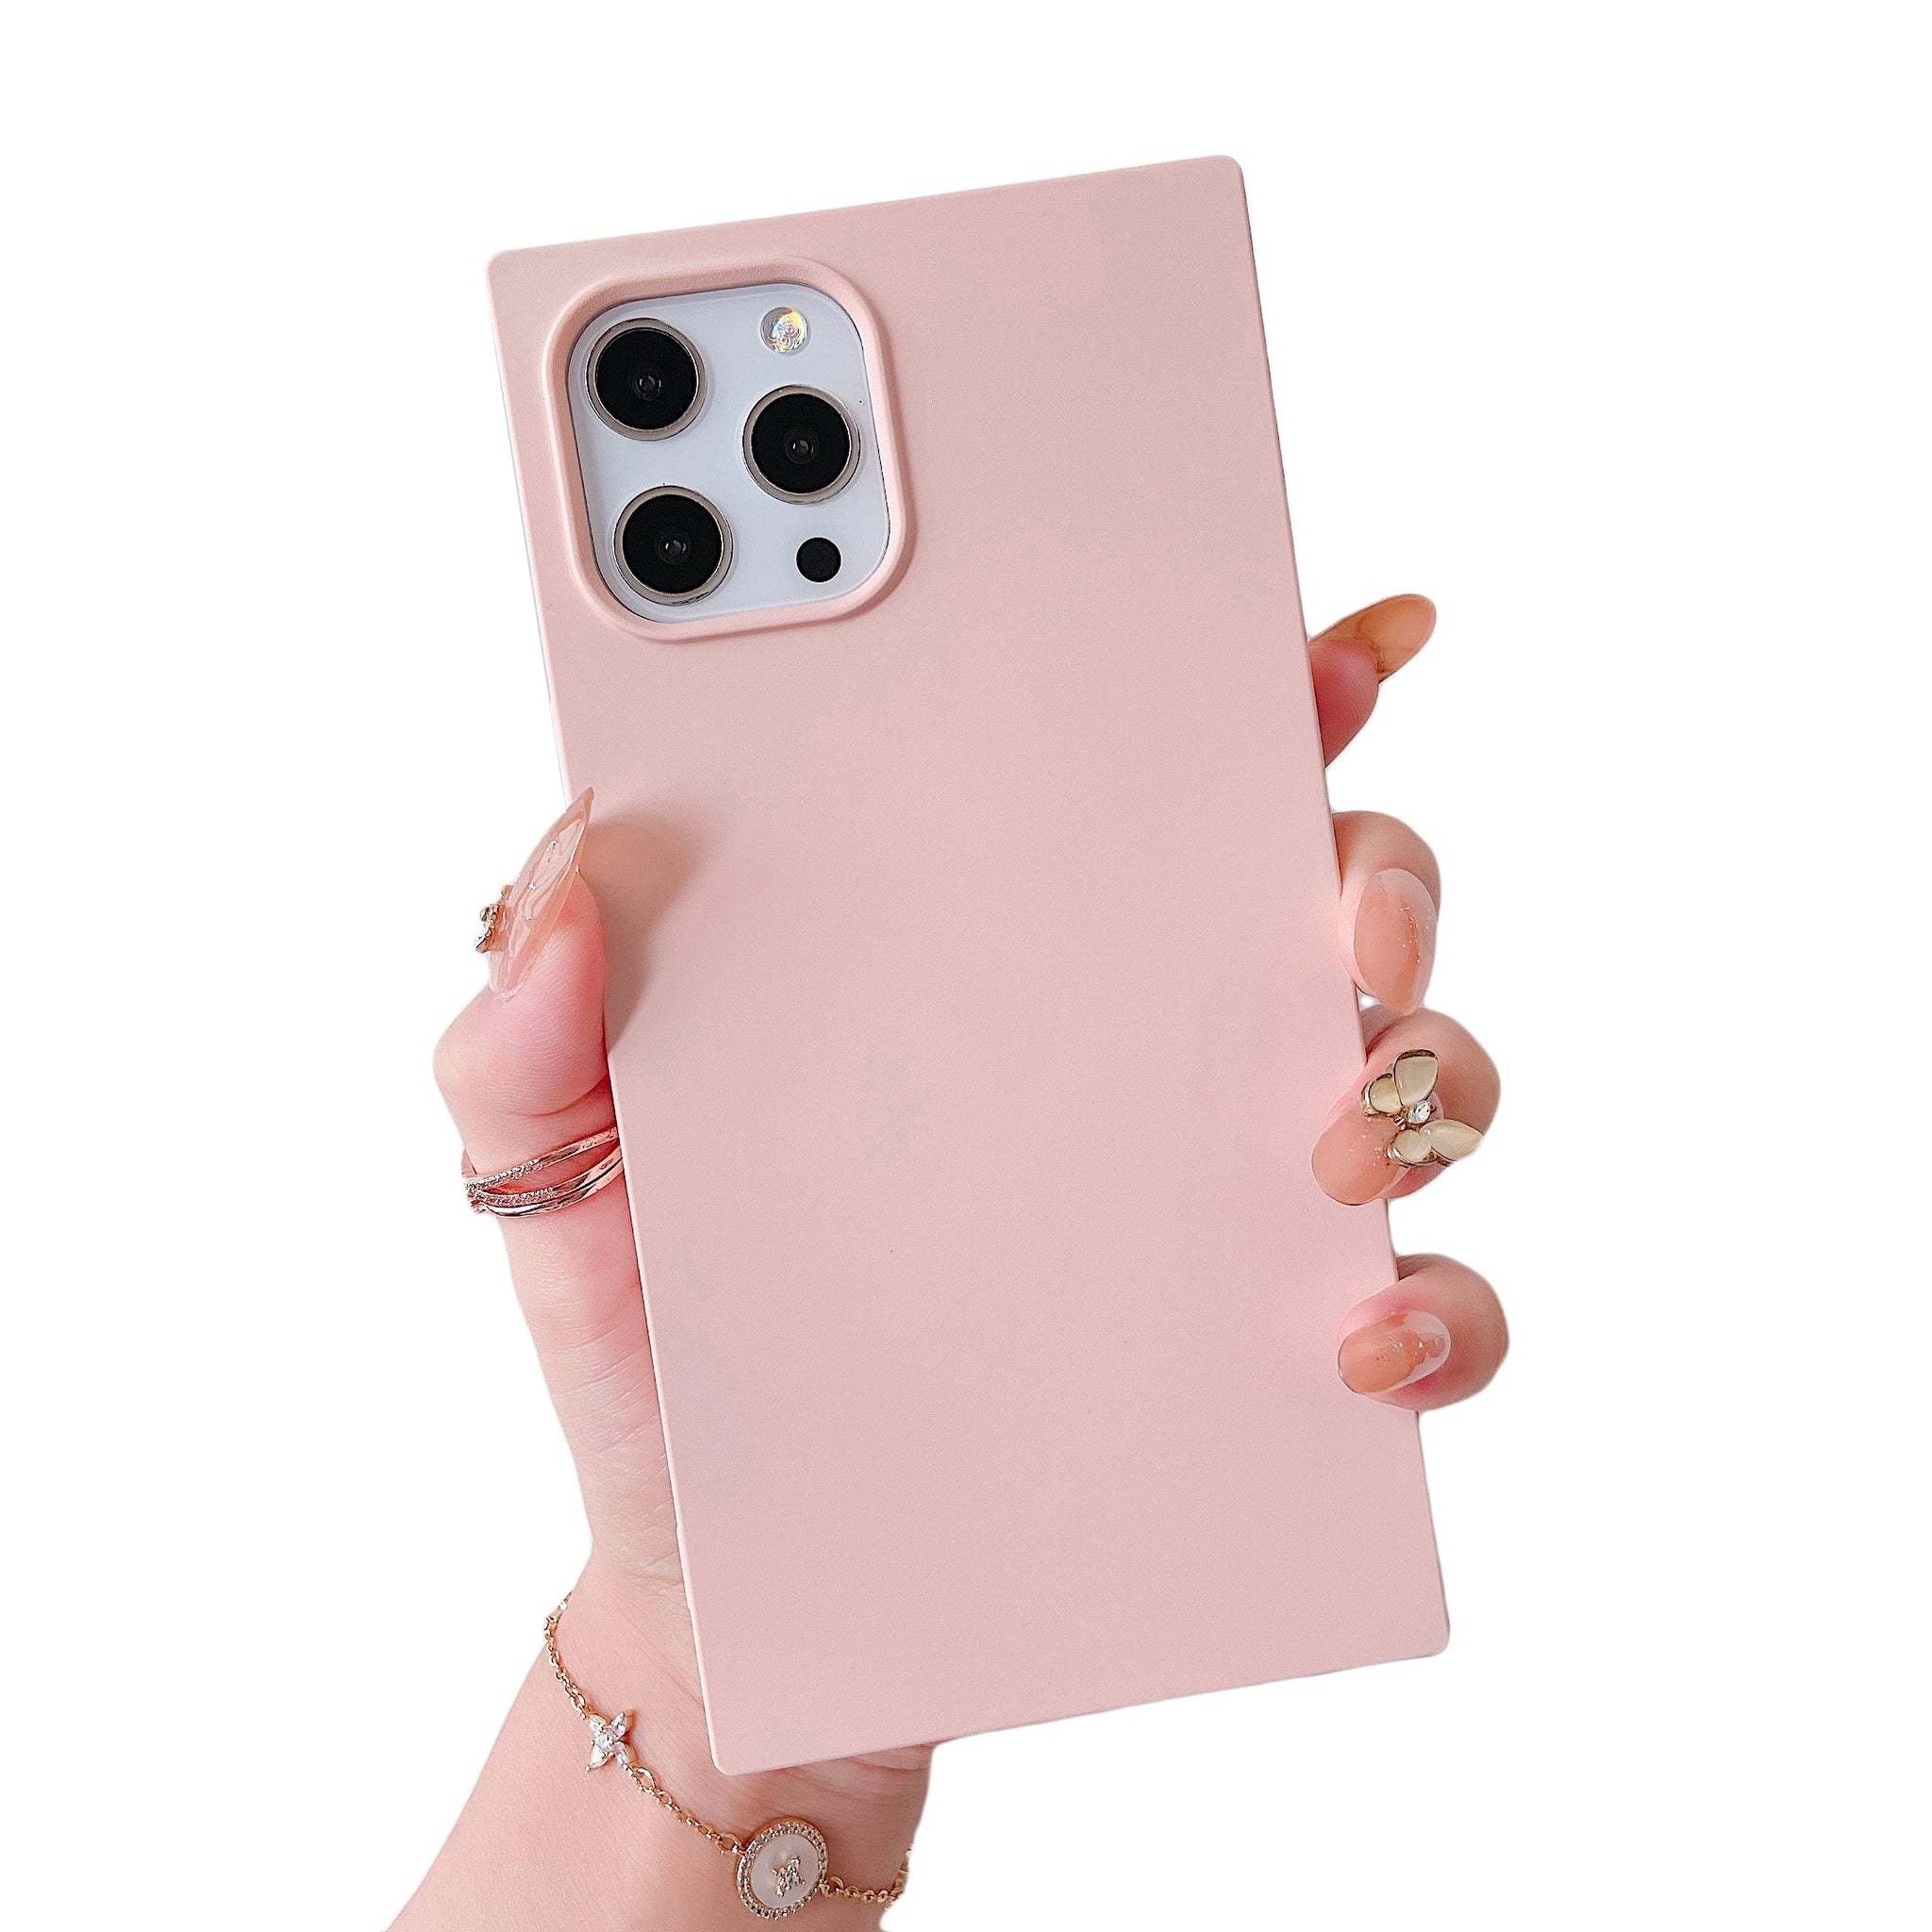 iPhone 11 Case Square Silicone (Chalk Pink)